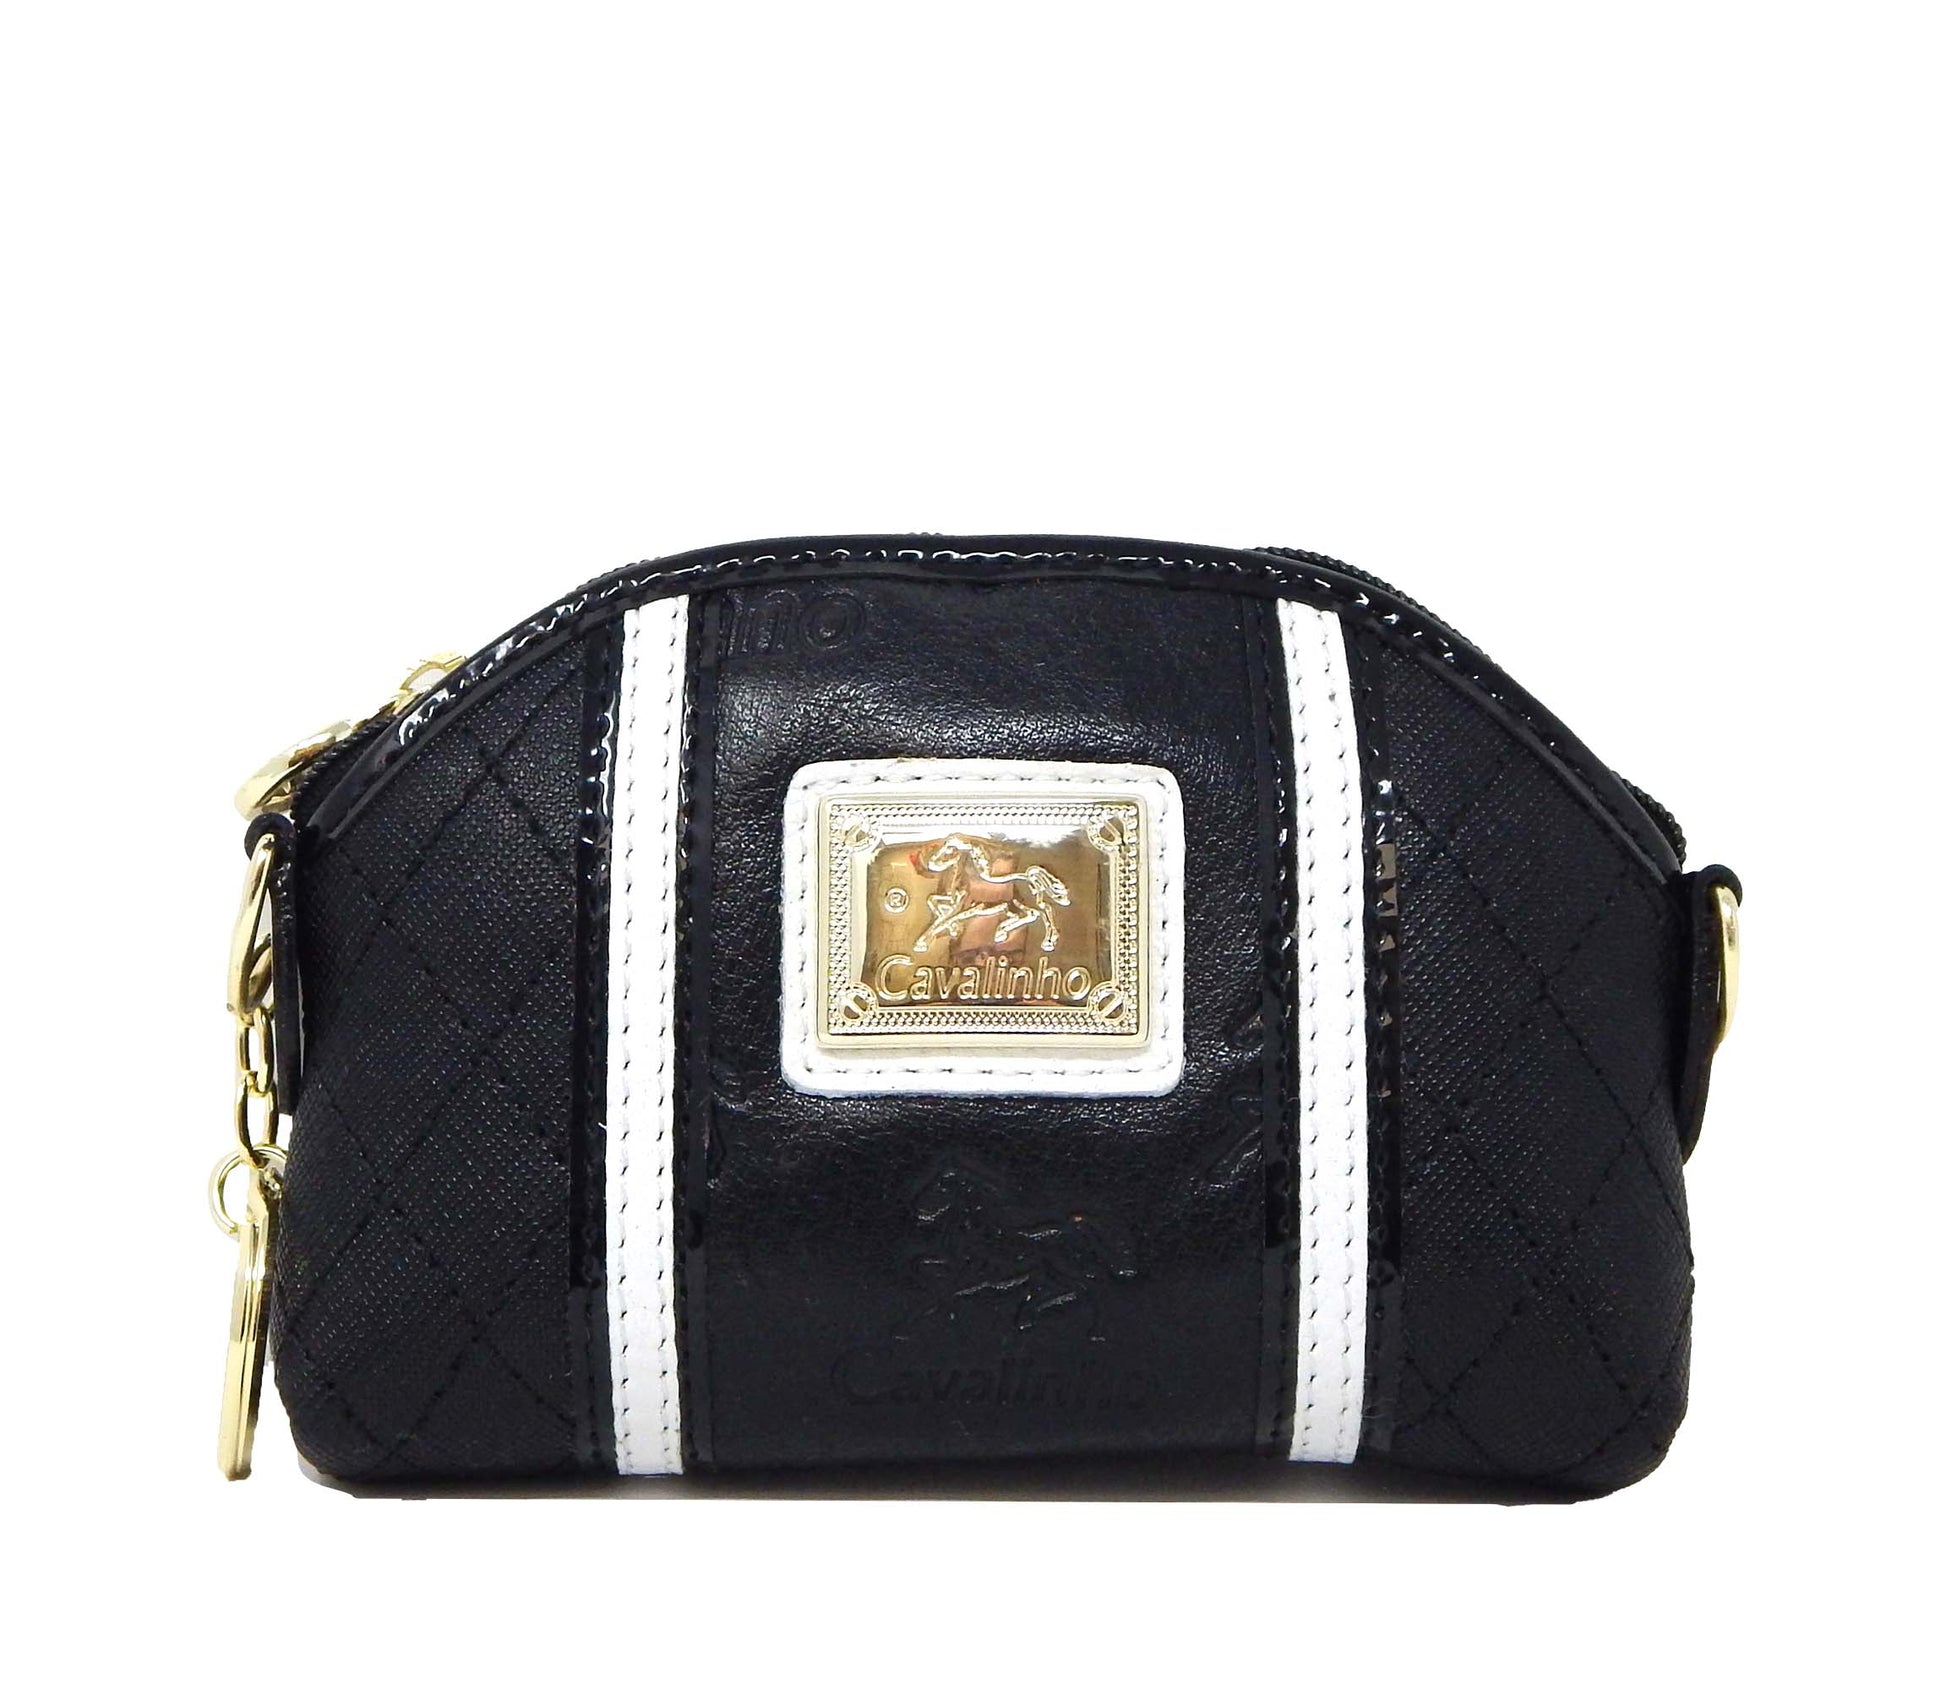 #color_ Black and White | Cavalinho Royal Change Purse - Black and White - 28390252.21.99_1